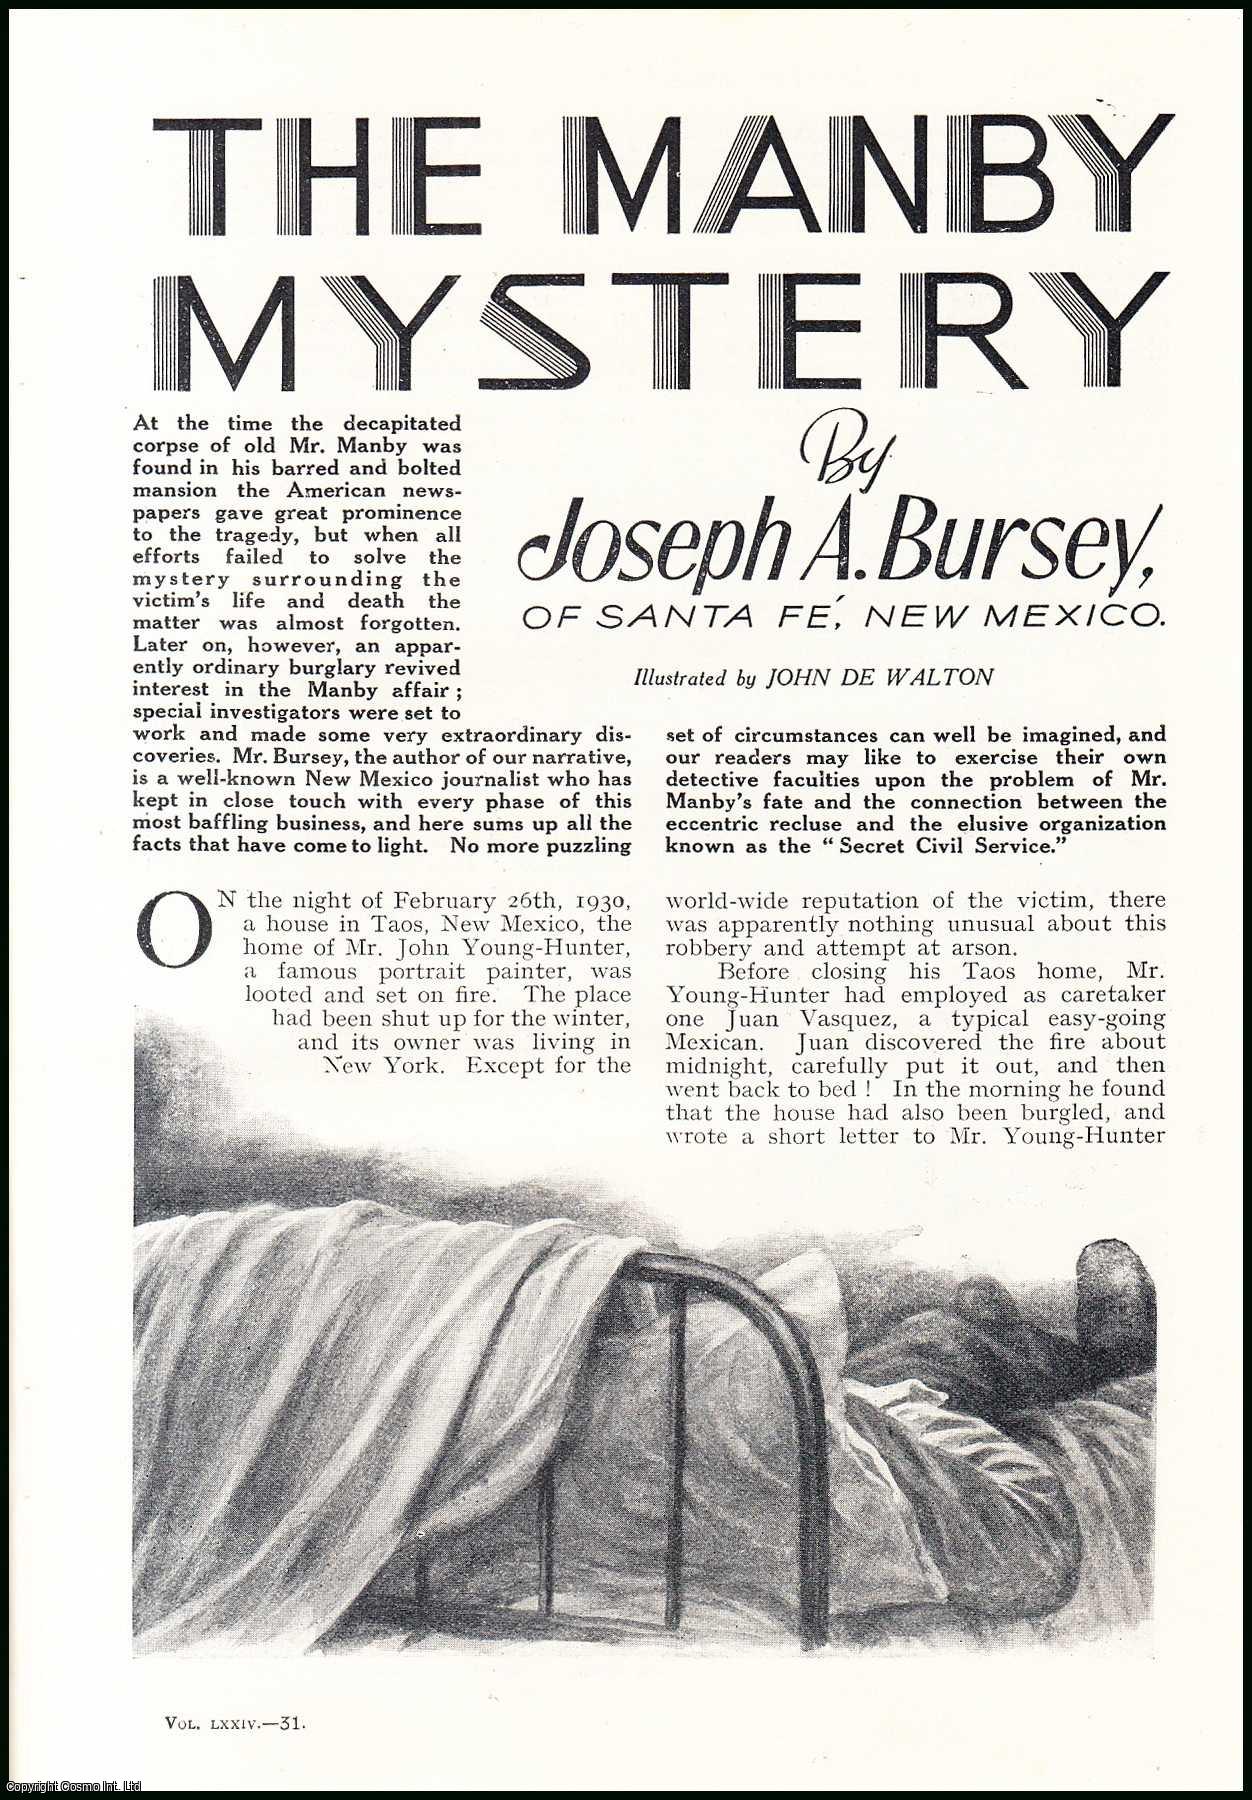 Joseph A. Bursey, of Santa Fe, New Mexico. Illustrated by John De Walton. - The Manby Mystery : Manby's decapitated corpse was found in his mansion. An uncommon original article from the Wide World Magazine, 1935.